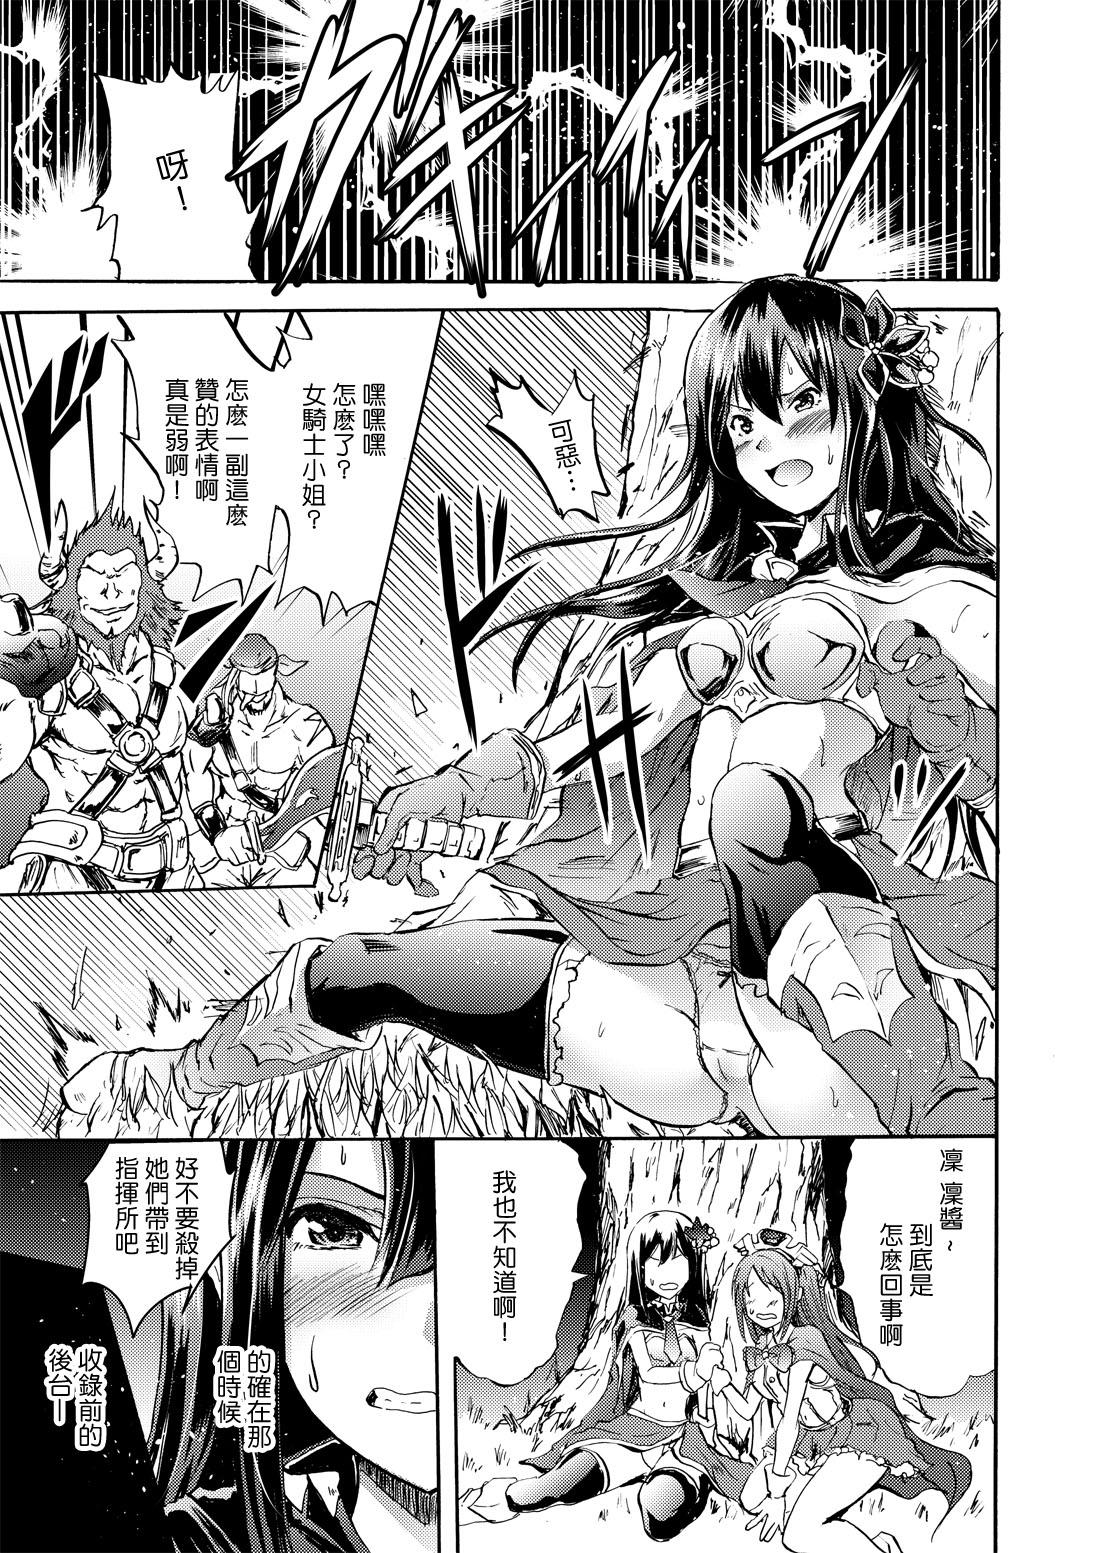 Spy Cam Onna Kishi de "Kuh..." na Rin-chan Now! - The idolmaster Granblue fantasy Tanned - Page 3